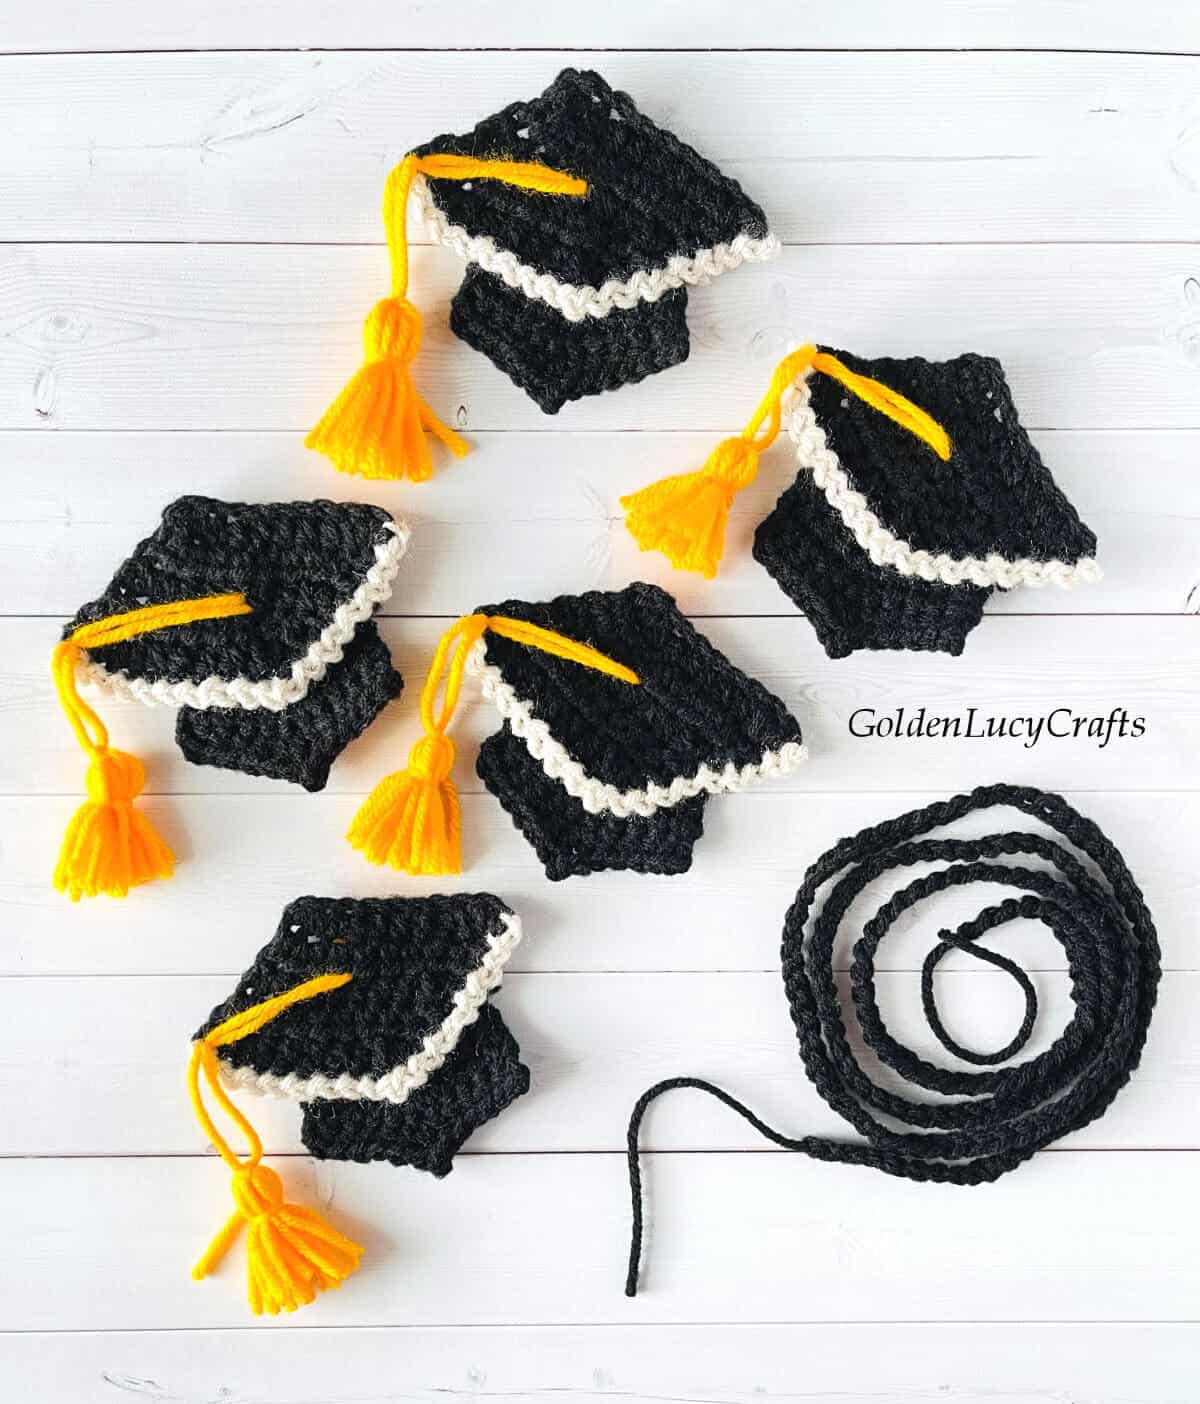 Five crocheted graduation caps and crocheted string.